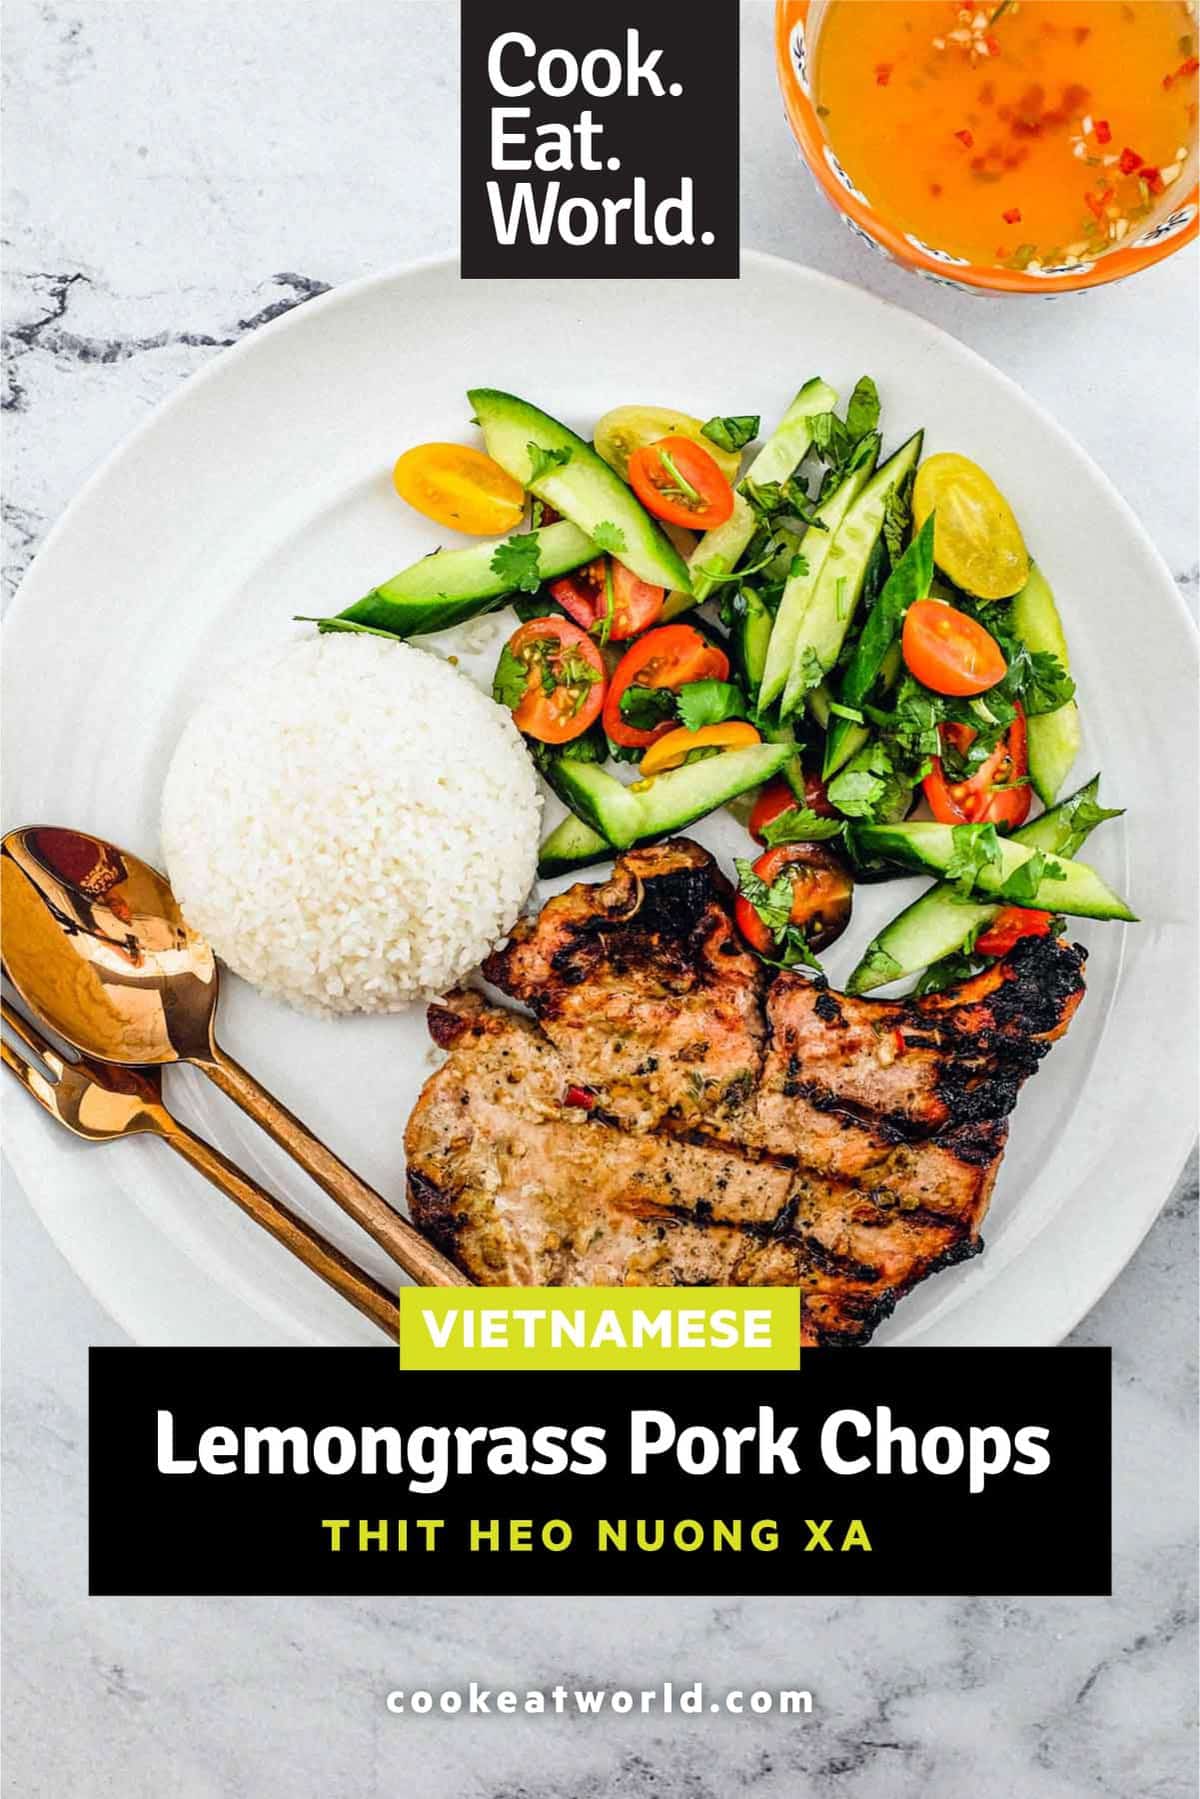 Pork chops marinated in lemongrass and other aromatic Vietnamese ingredients. Served with a simple salad of cucumber, tomato and herbs. A Nước chấm dipping sauce accompanies.